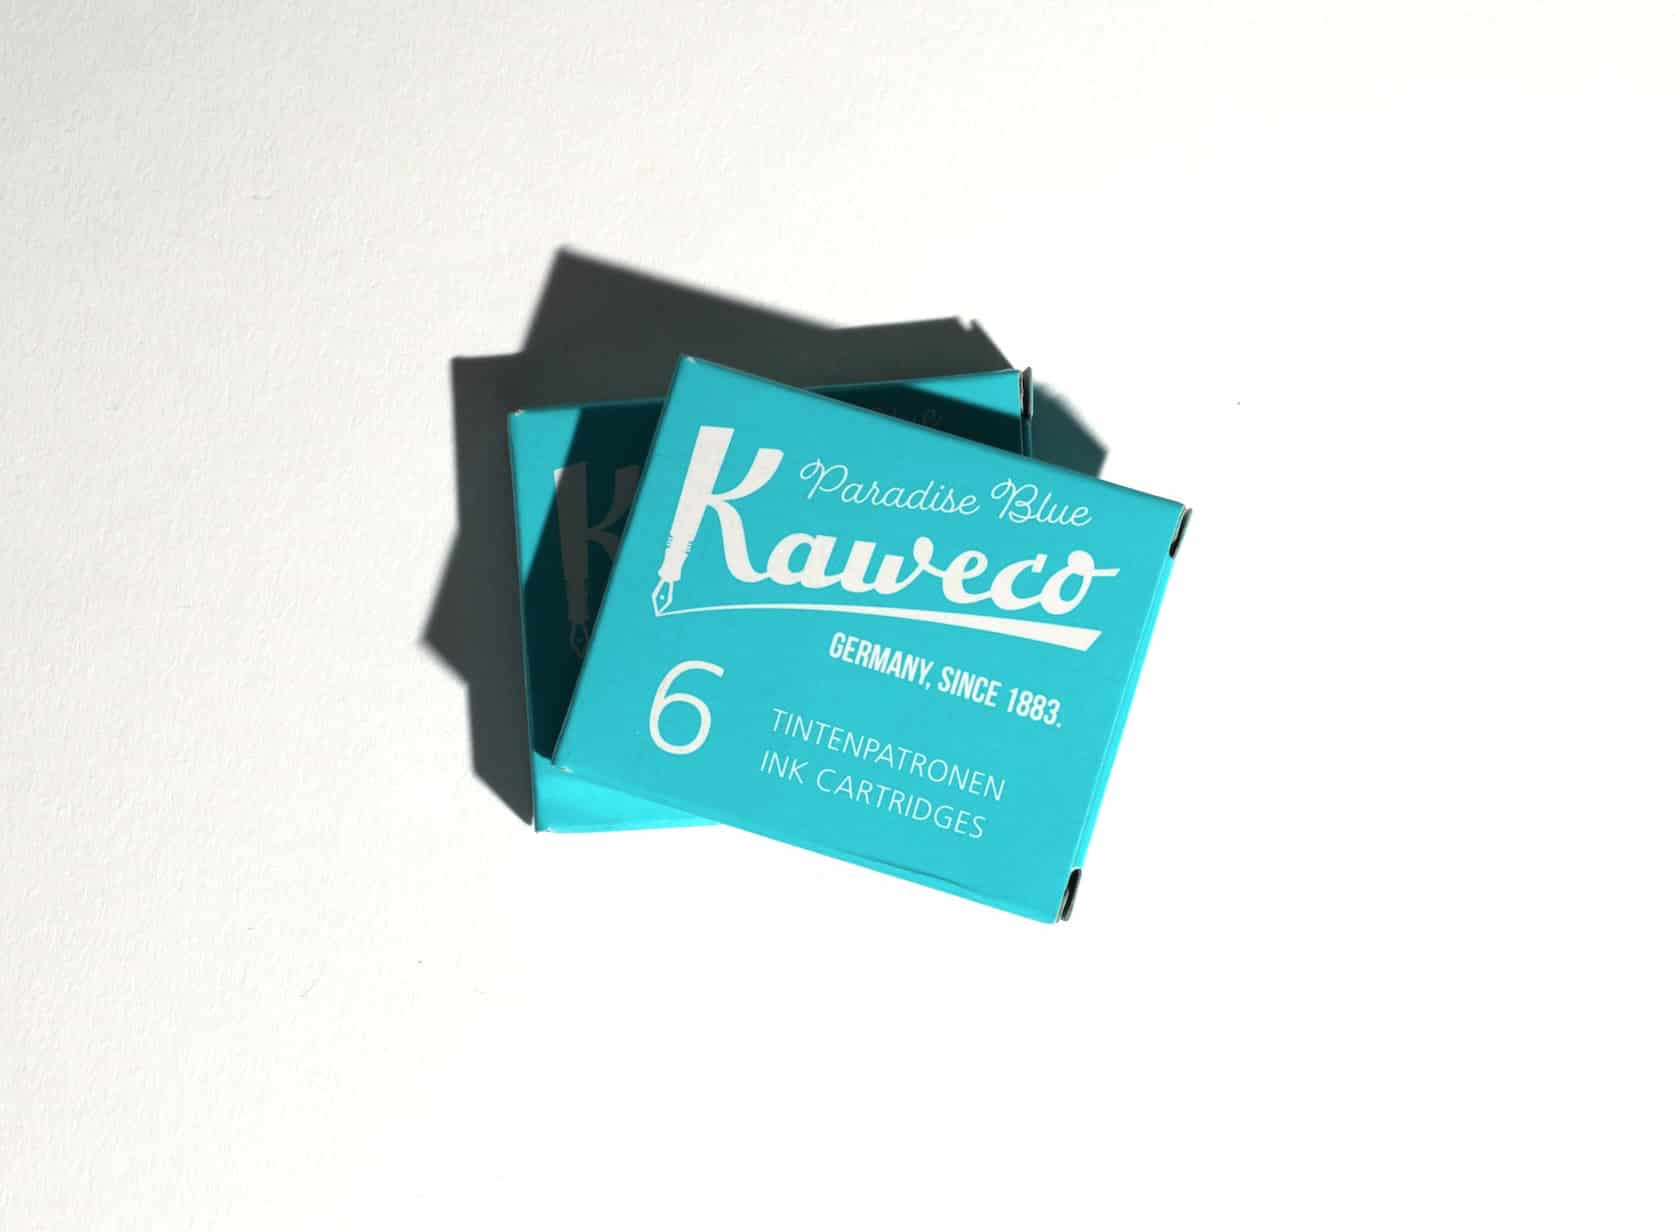 Two boxes of ink cartridges lie on a white surface. Text on packaging reads: Kaweco. Paradise Blue. Germany, since 1883. 6 Tintenpatronen. Ink Cartridges.